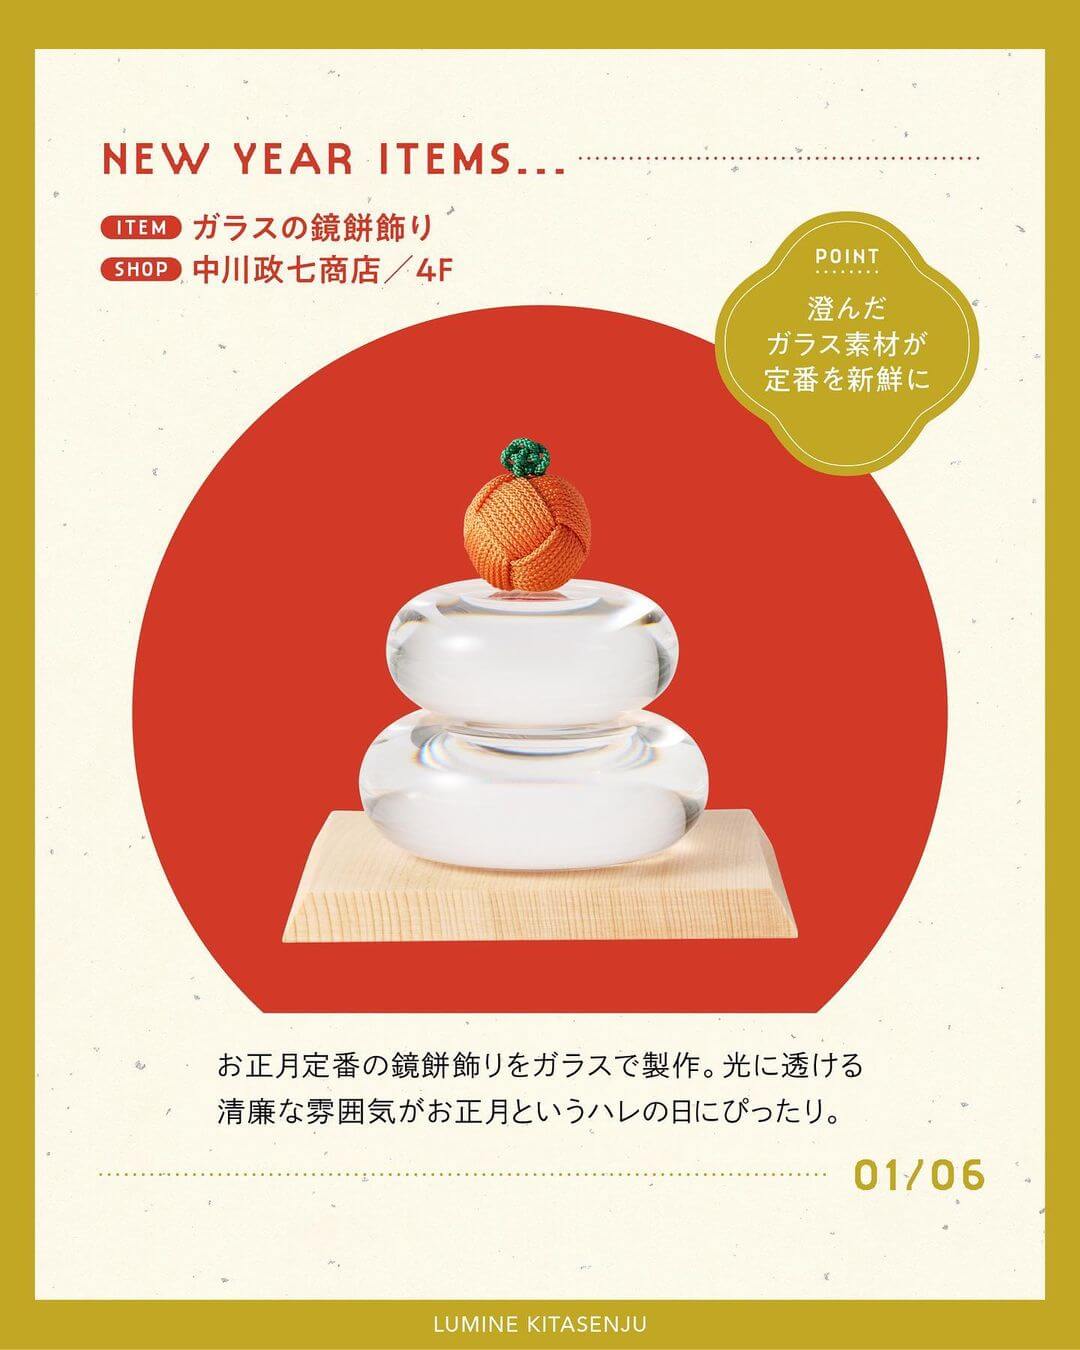 Interior / Accessories, New Year, Cute, Natural / Refreshing, Casual, Japanese-style Banner Designs